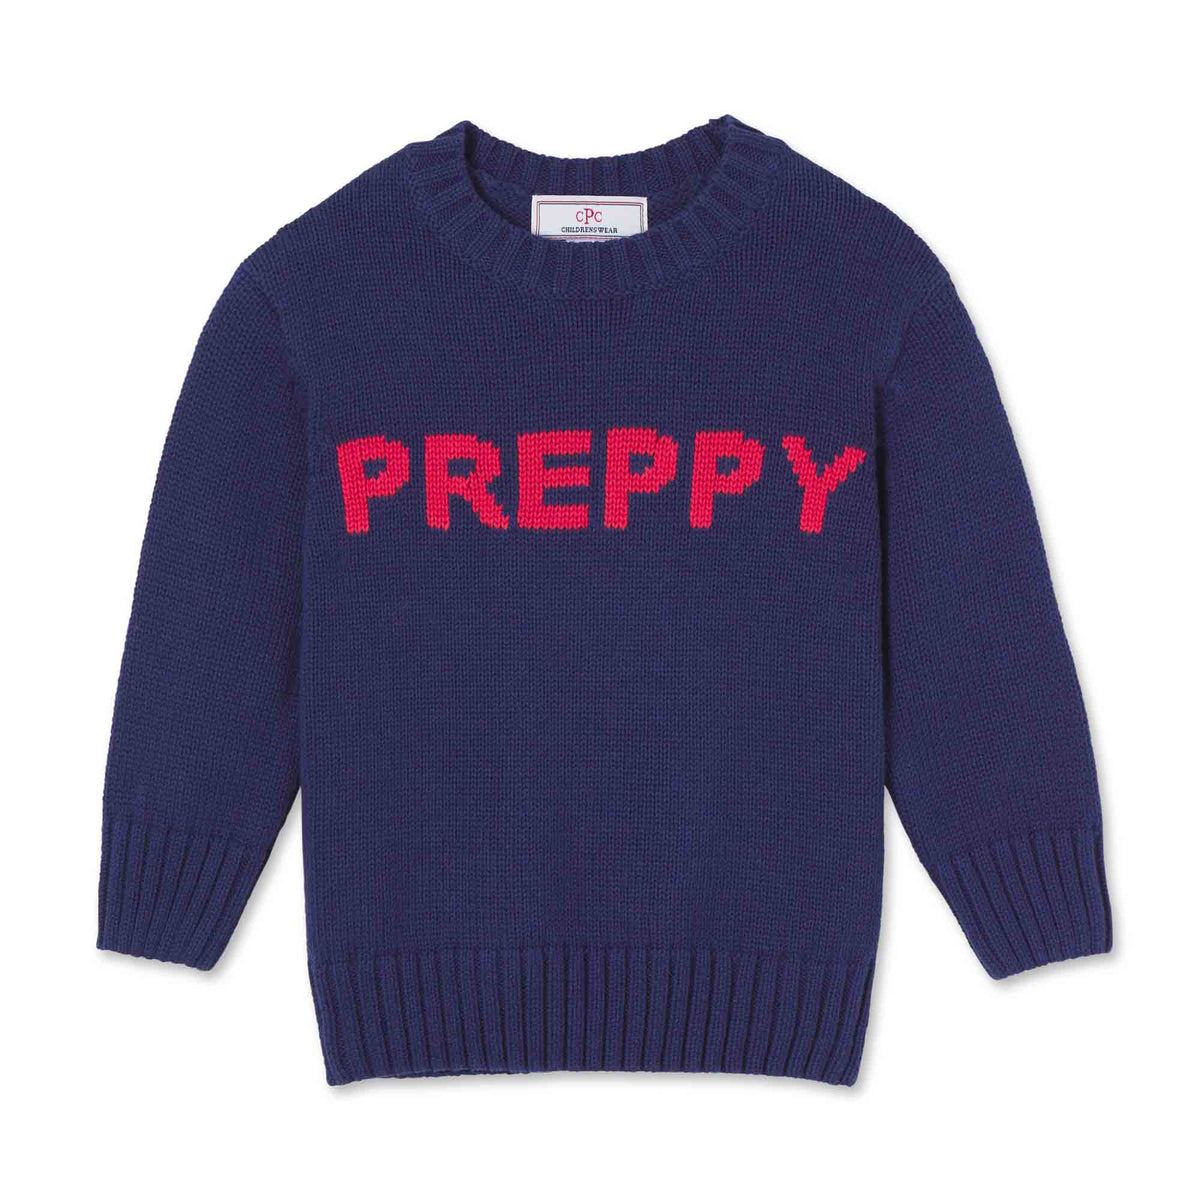 Classic and Preppy Preppy Heritage Sweater, Blue Ribbon-Sweaters-Blue Ribbon-2T-CPC - Classic Prep Childrenswear